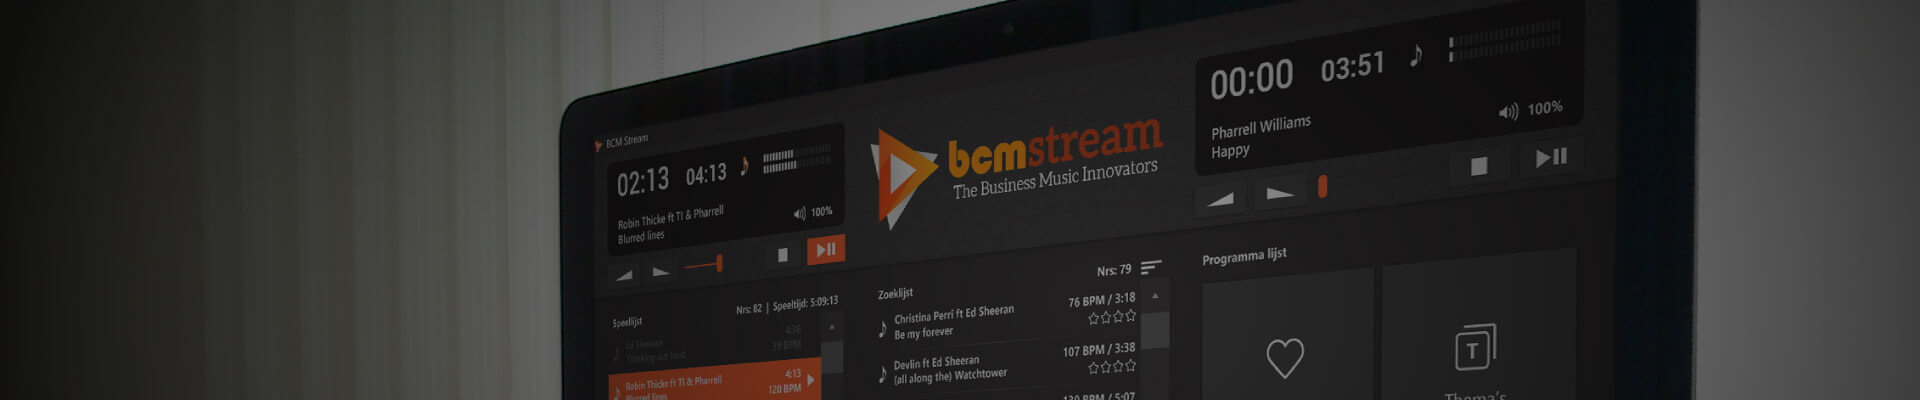 The BCM Stream products